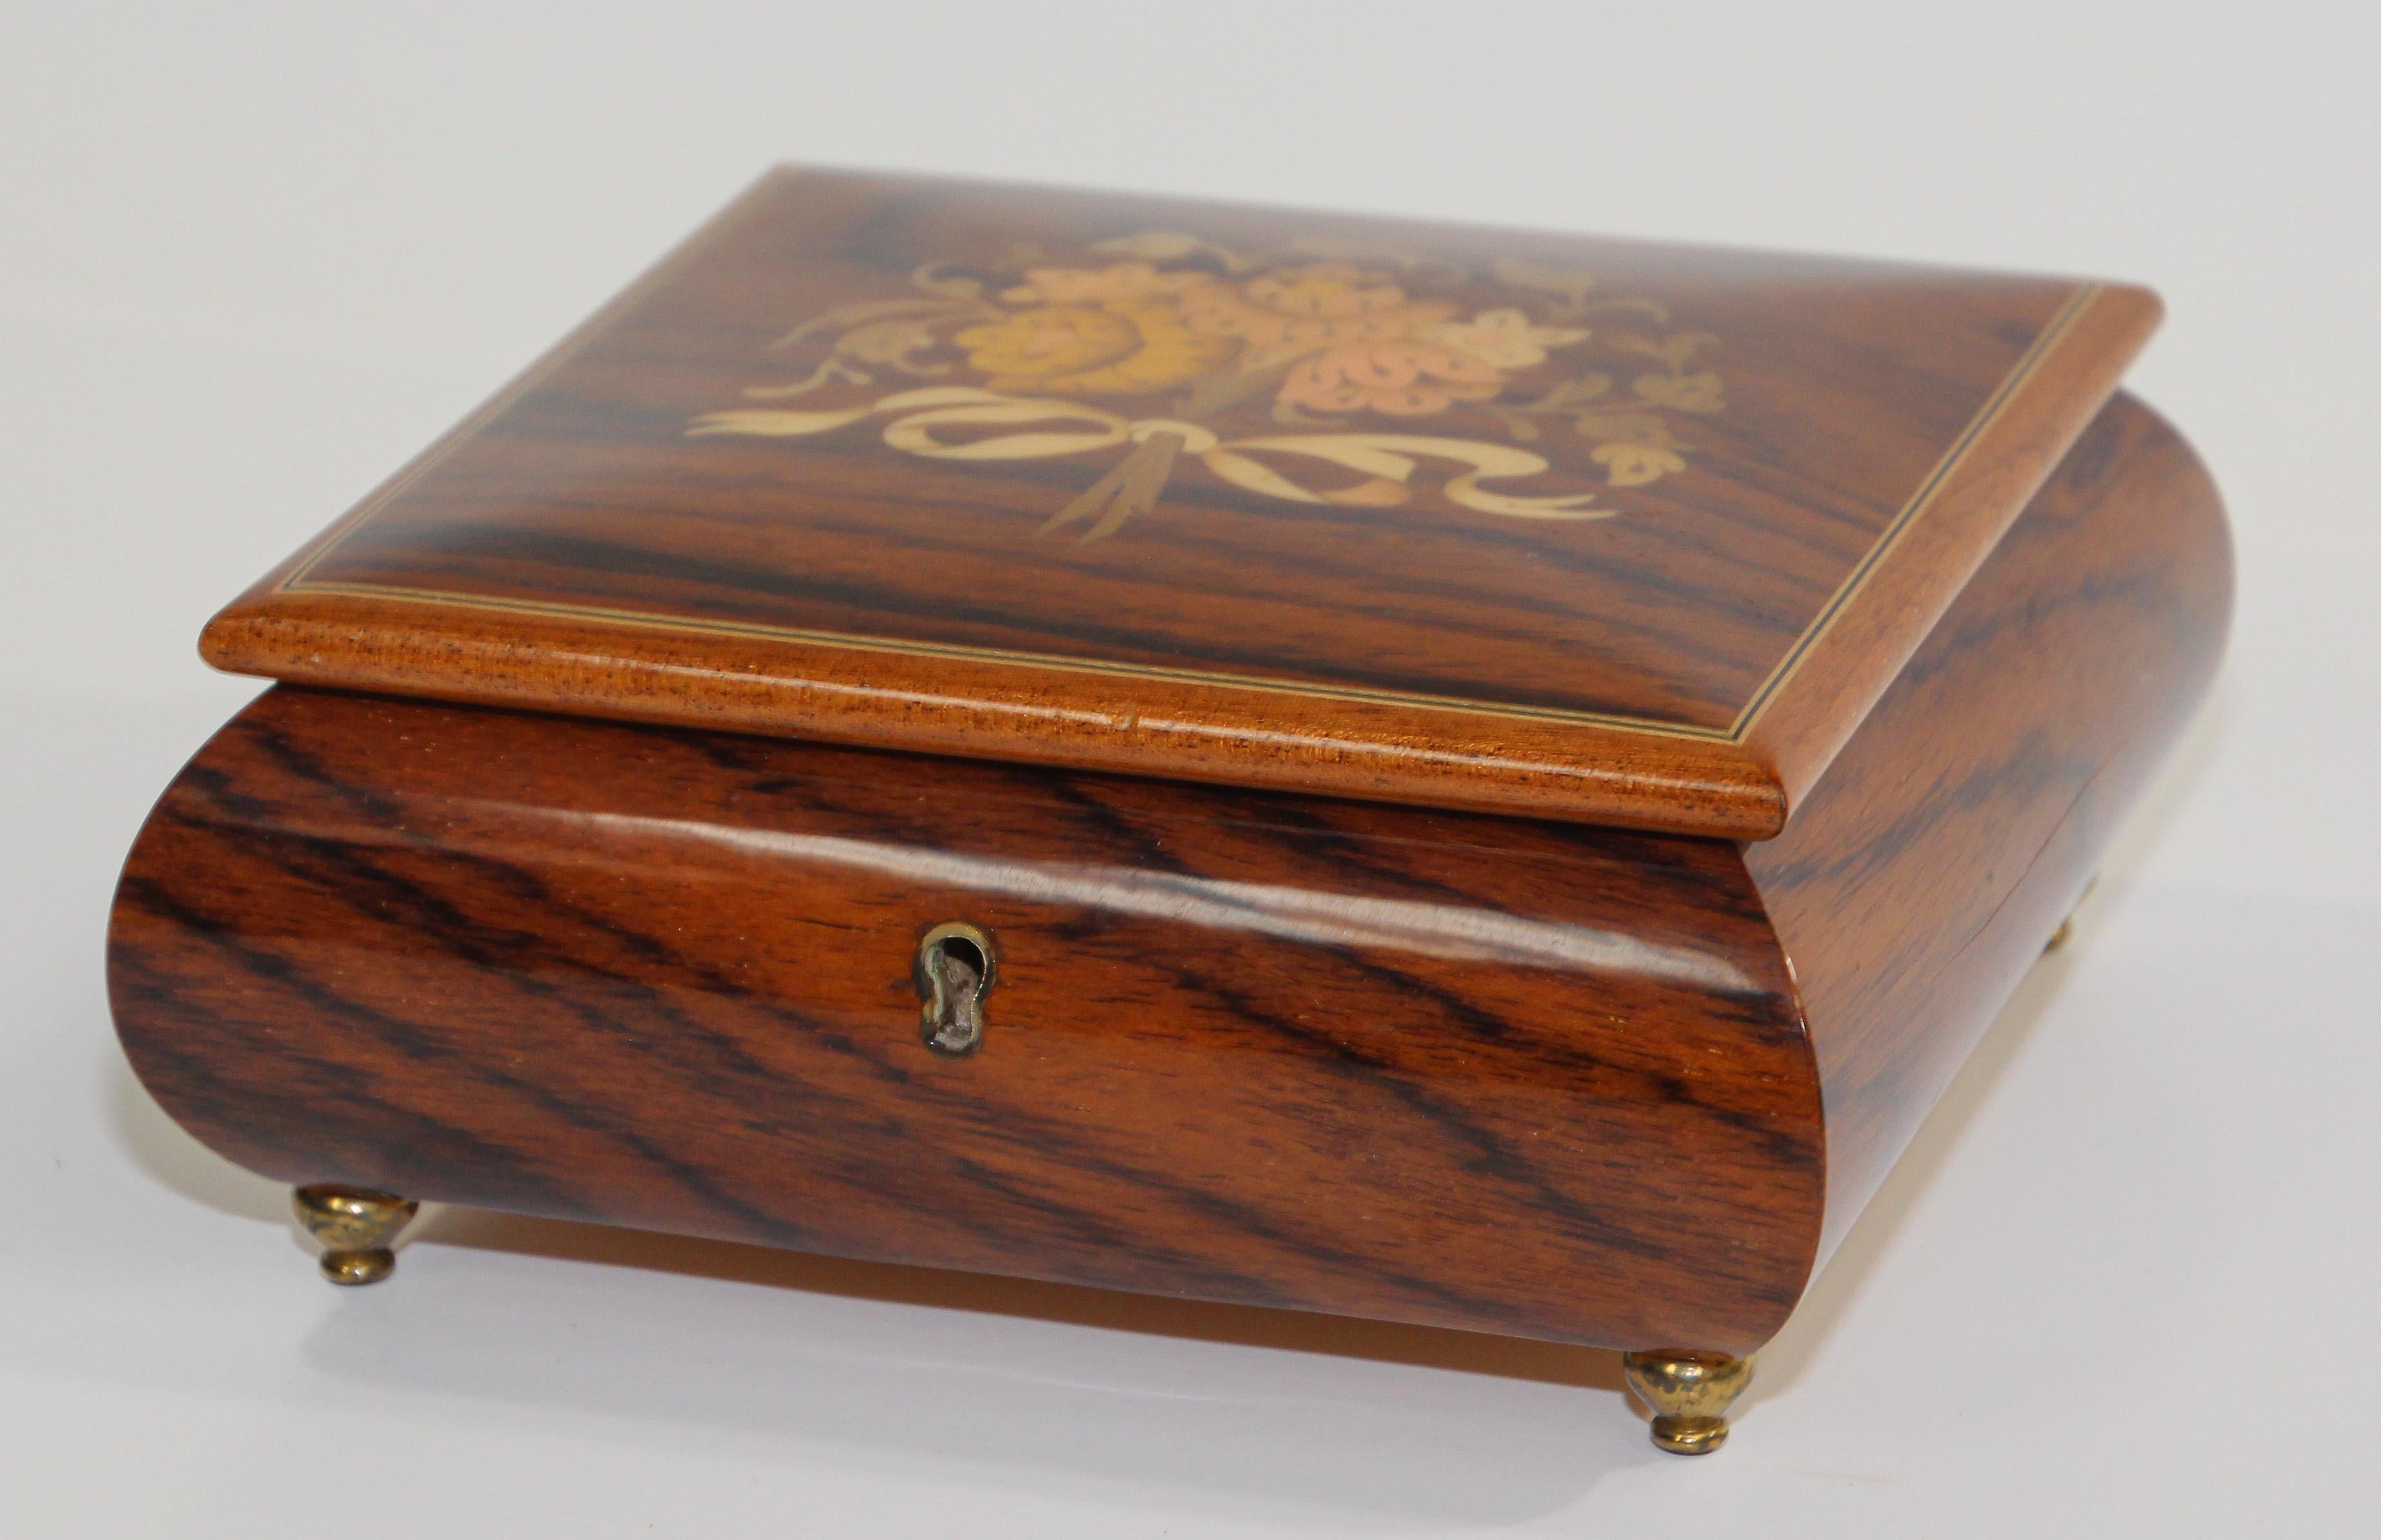 Elegant footed wooden box in thuya wood.
Thuya tree is famous for rich gold and brown shades of its grain and unique exotic fragrance, similar to cedar.
Elegant large vintage footed wooden decorative box with top finely hand painted and inlaid with